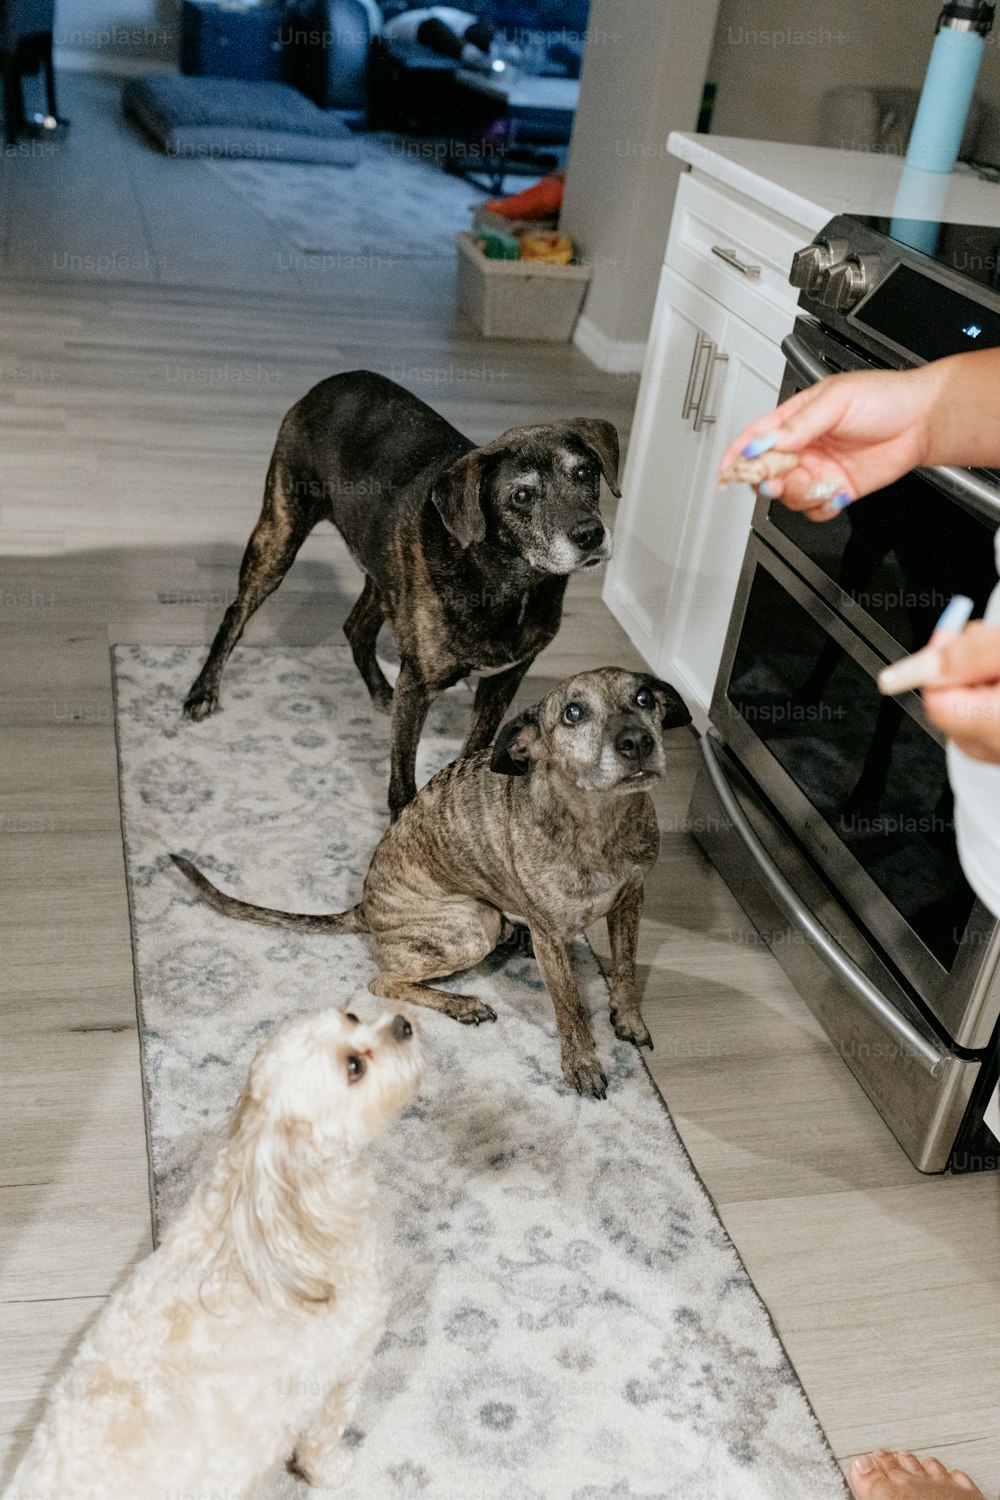 a group of dogs standing on top of a kitchen floor